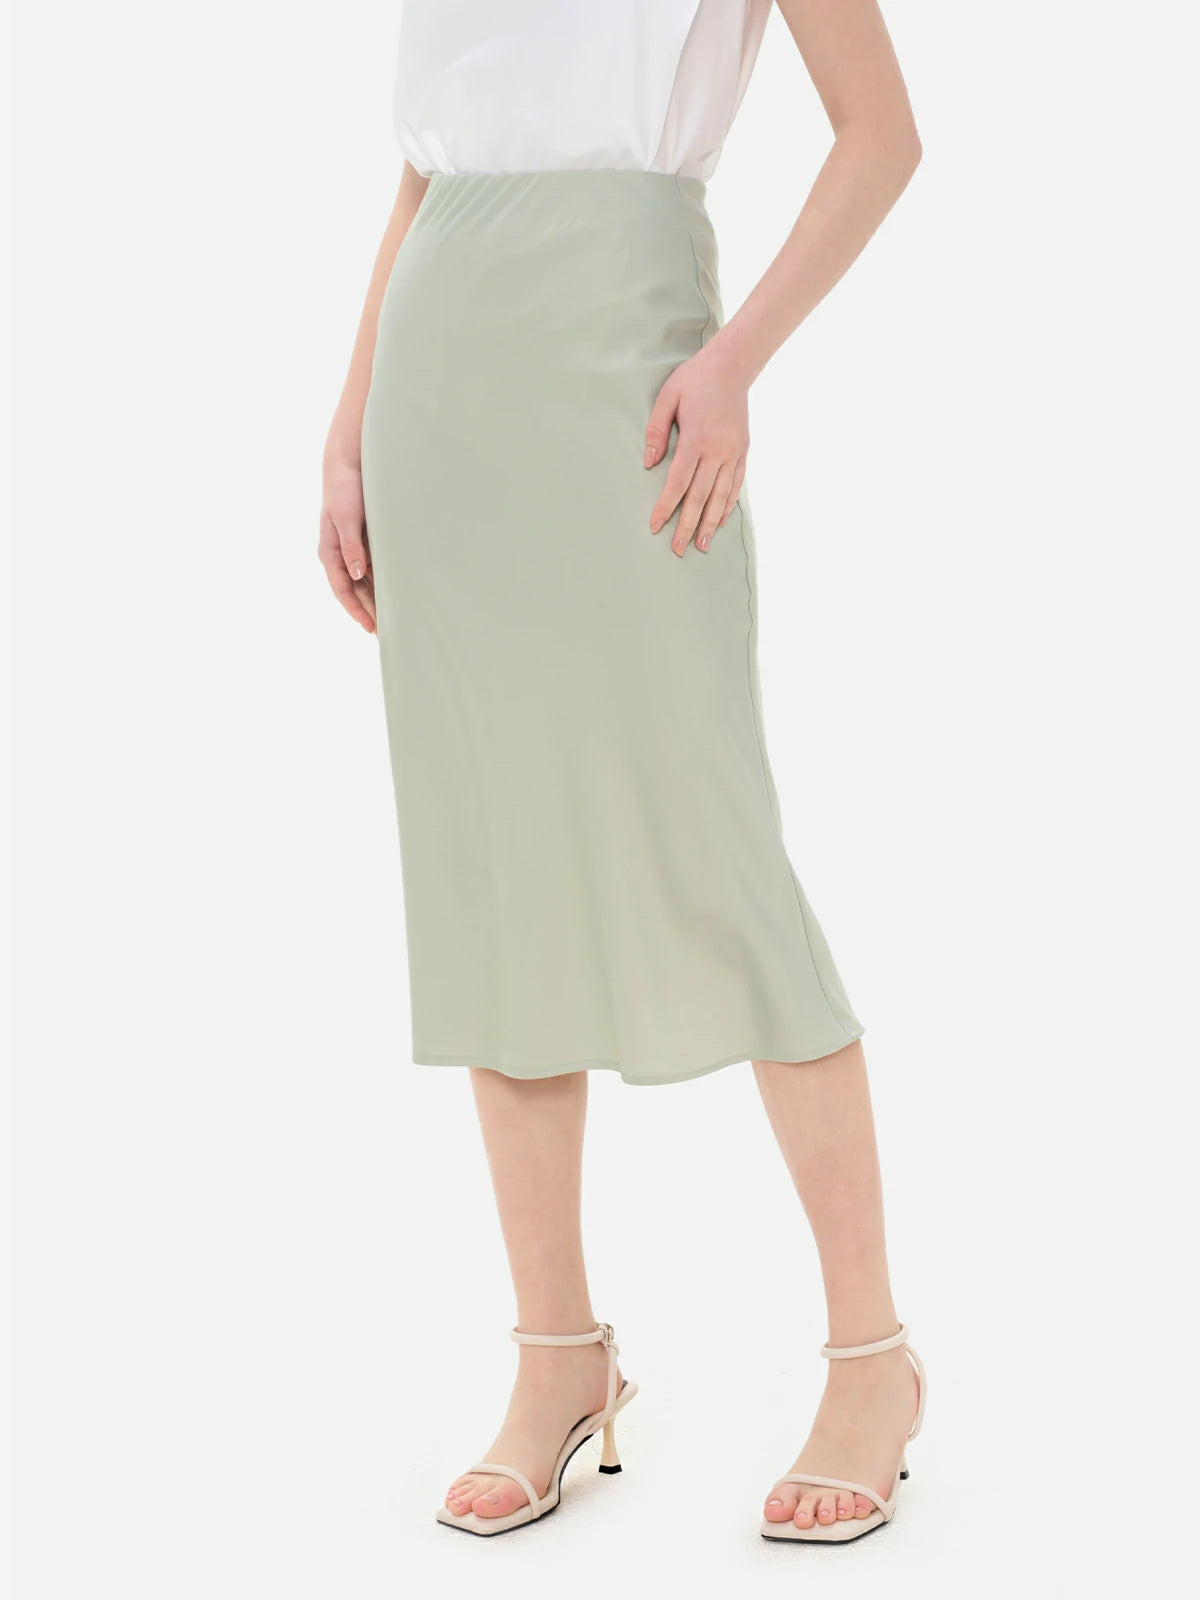 Fresh and ethereal feel in a straight green skirt